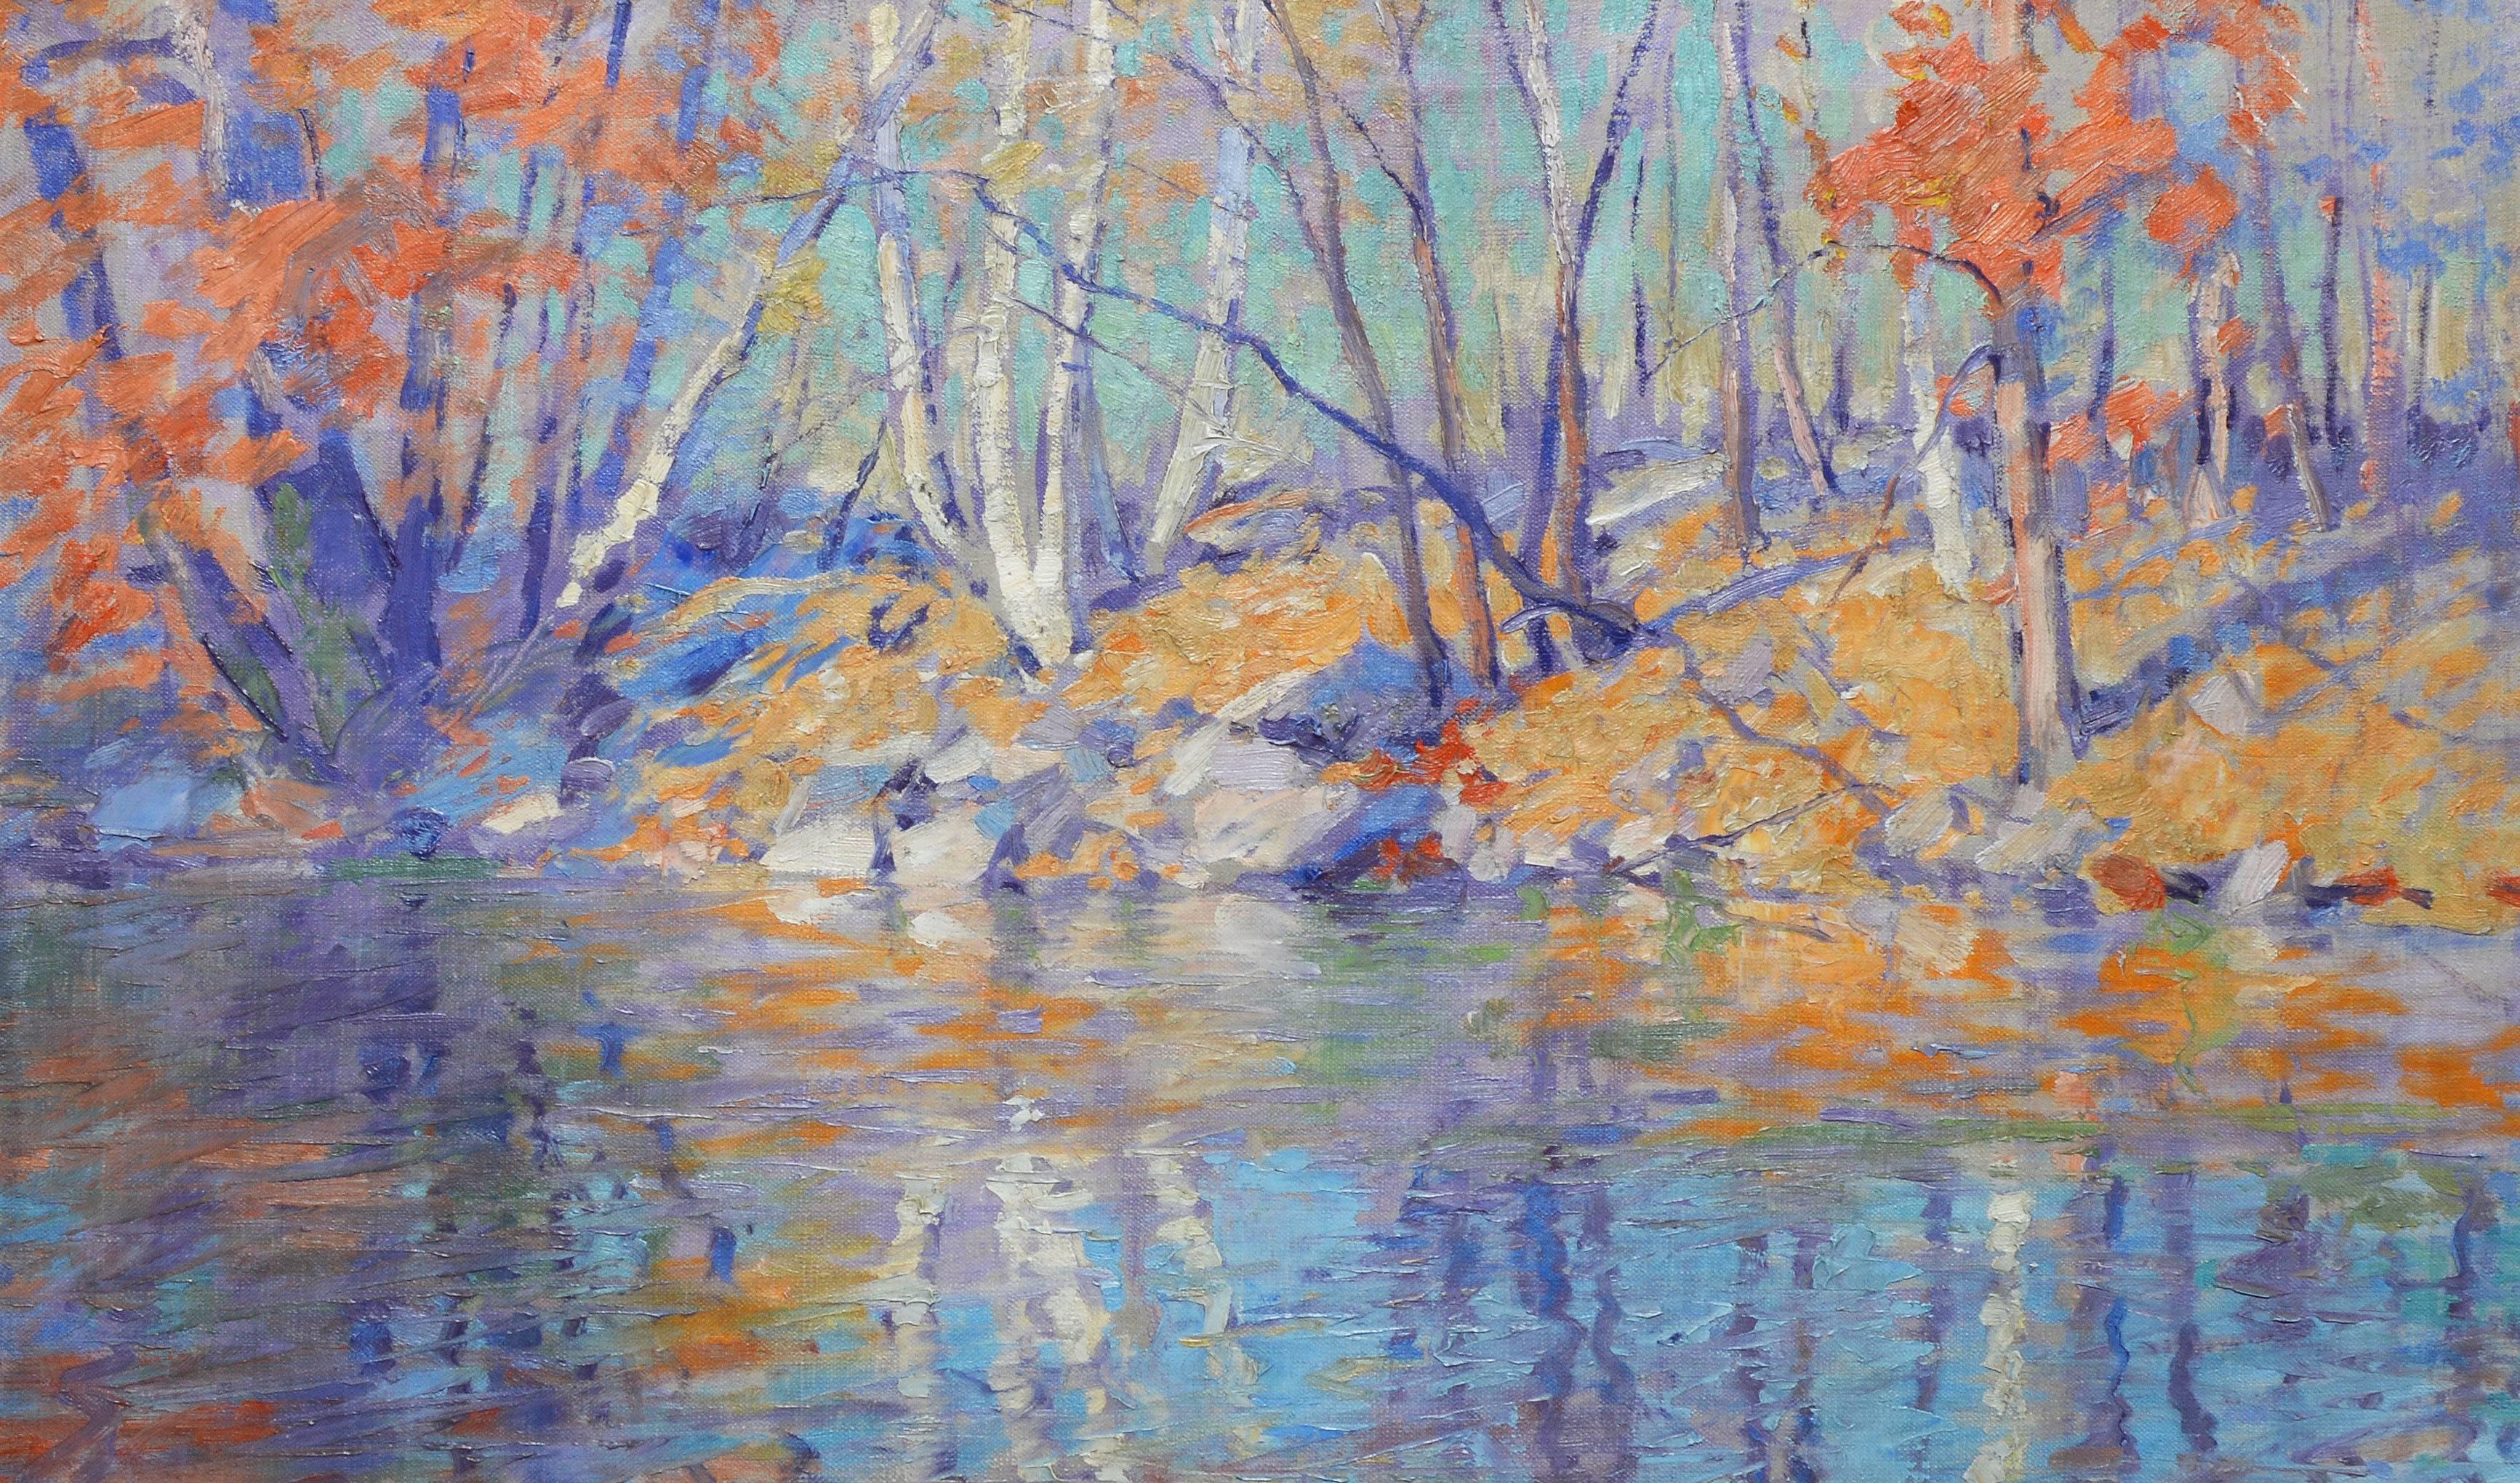 Impressionist oil painting of a fall landscape by Emile Albert Gruppe (1896-1978).  Oil on canvas, circa 1930.  Signed lower left, 